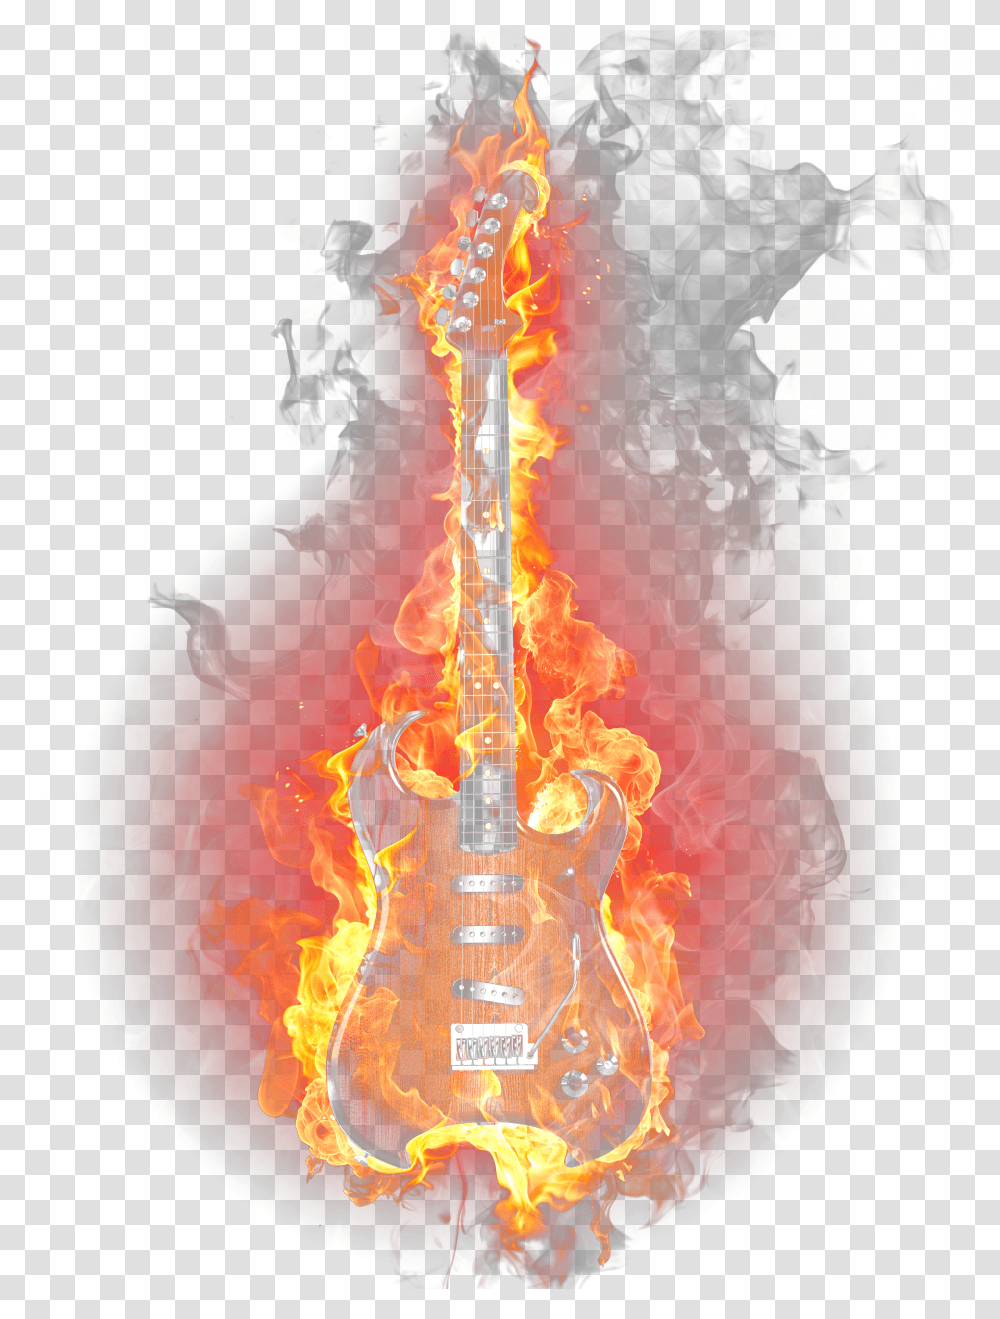 Fire Light Flame Guitar Burning Download Free Clipart Transparent Png